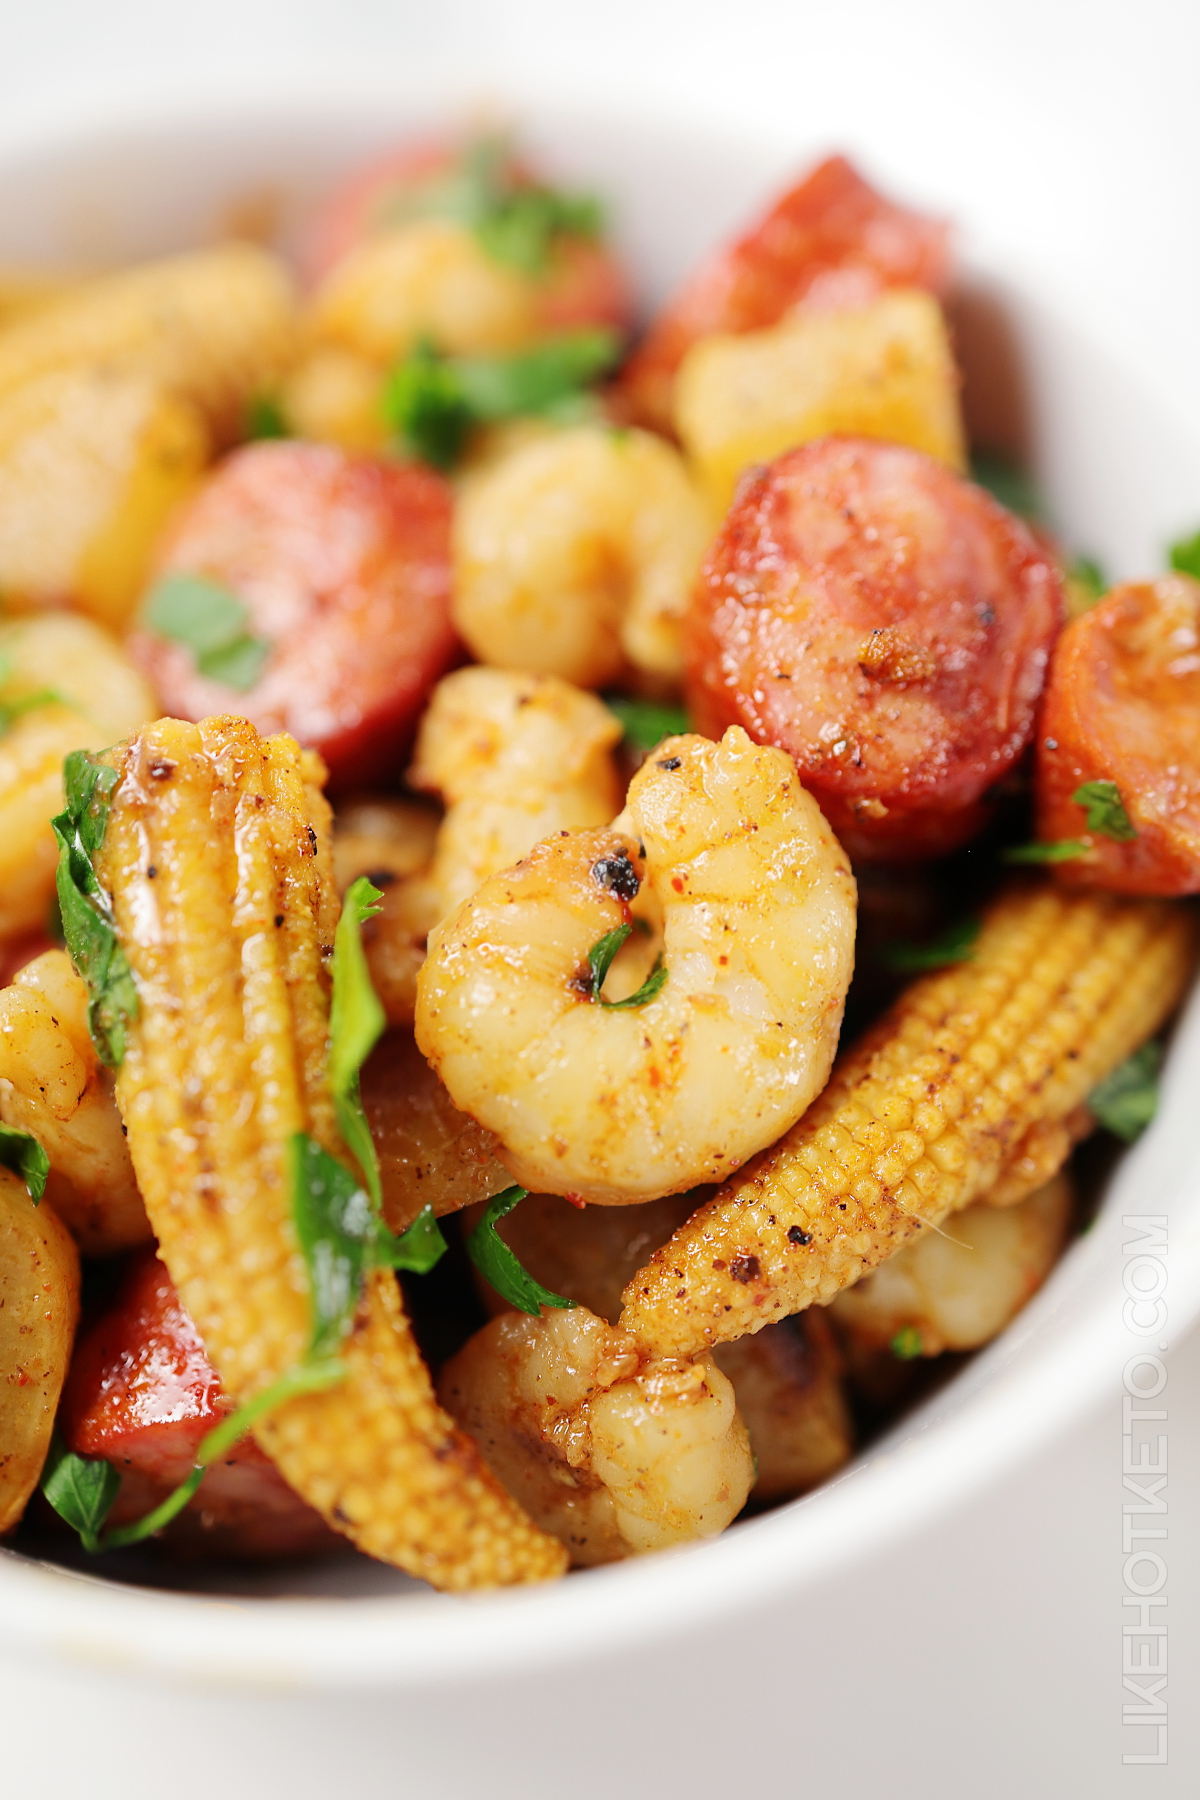 Low-carb seafood boil with shrimp and andouille sausages in a white bowl.